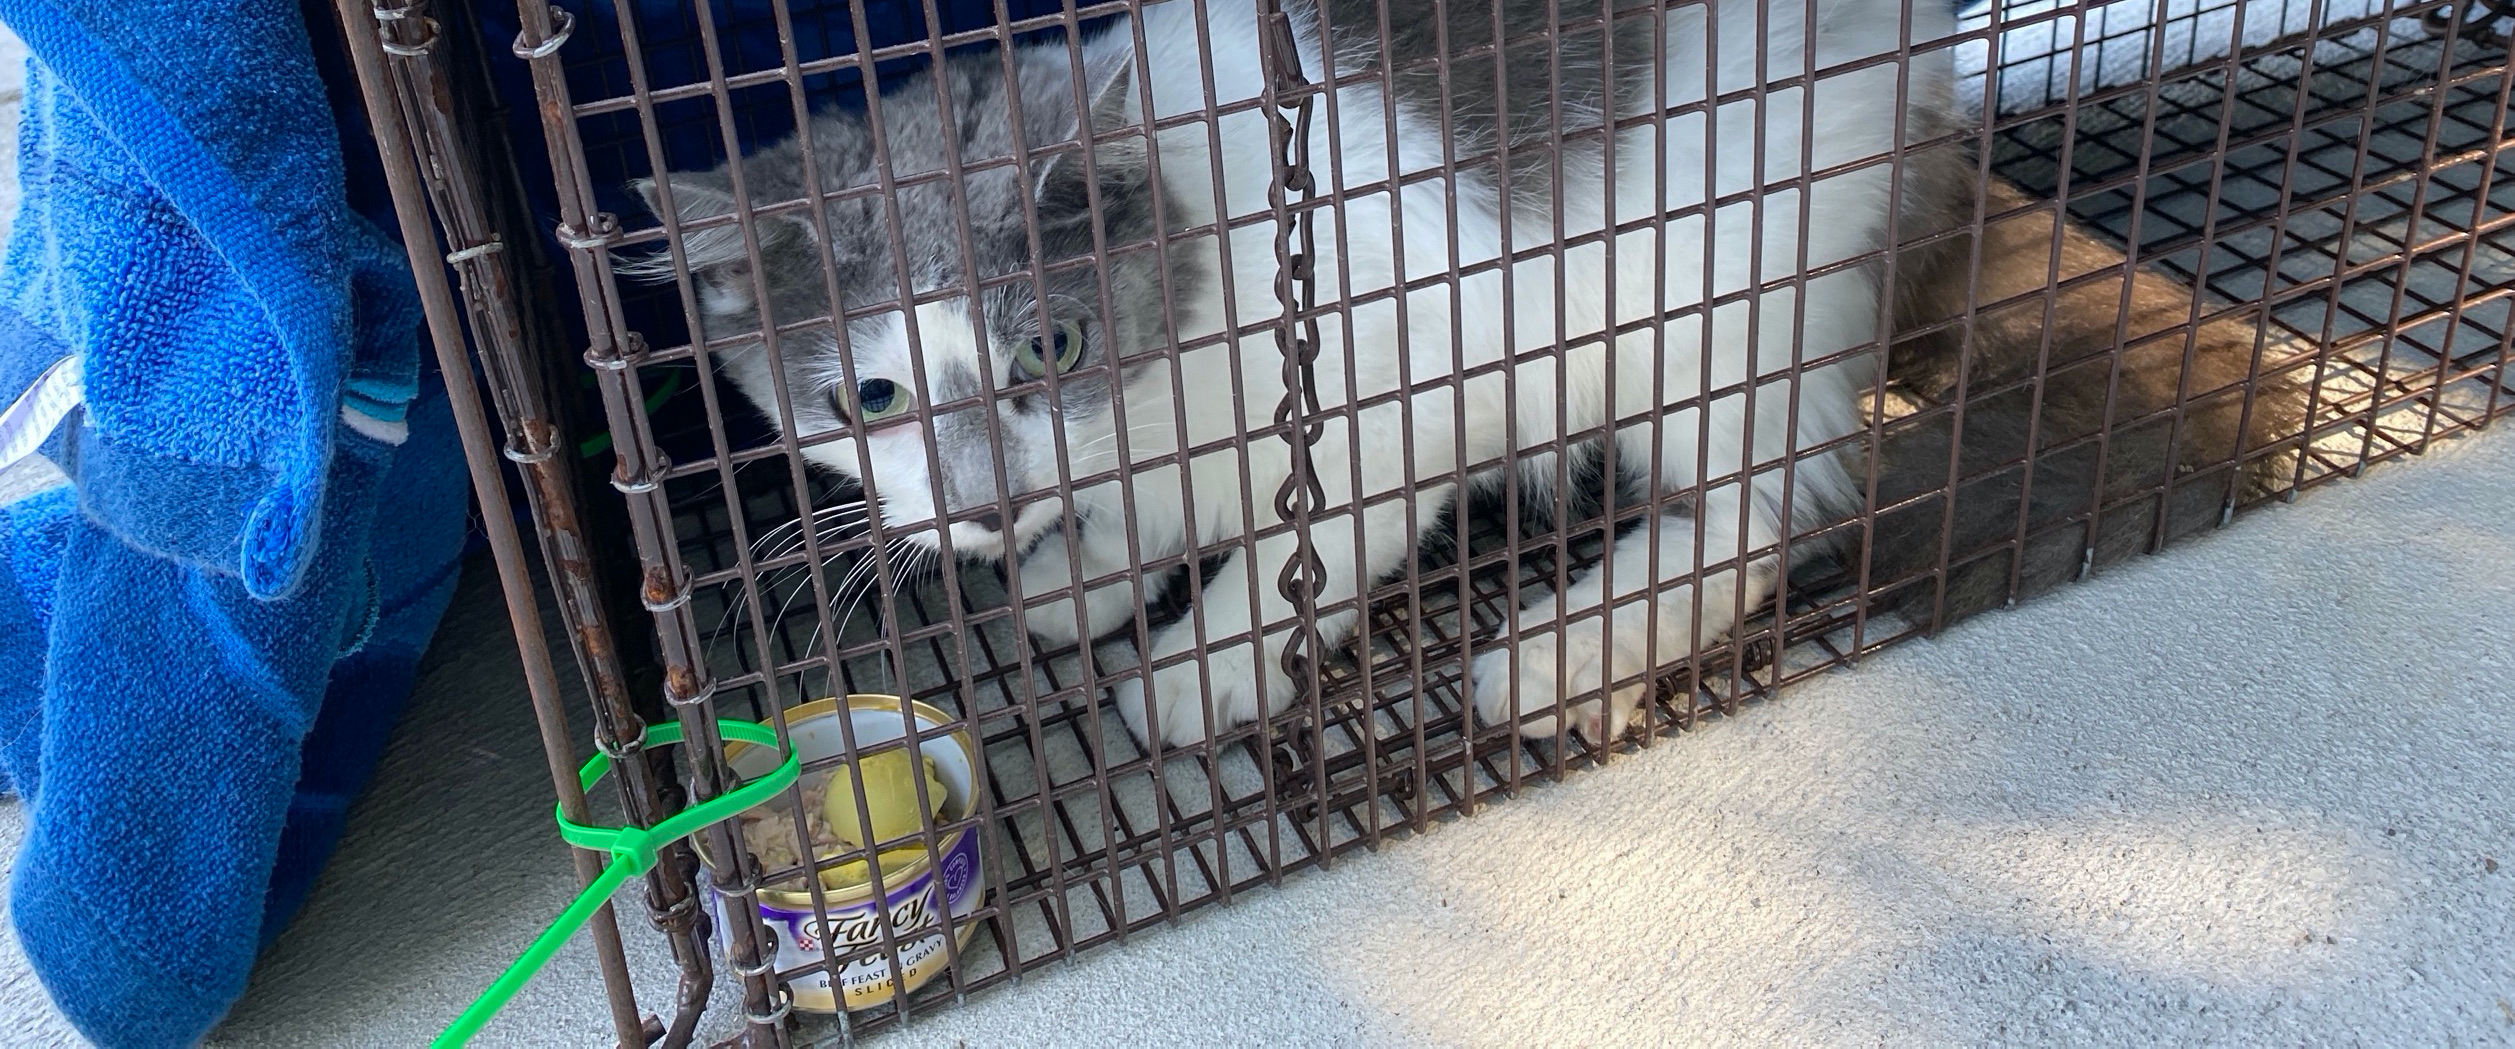 Rochelle responds to controversial post: No euthanasia, but feral cat traps  still available